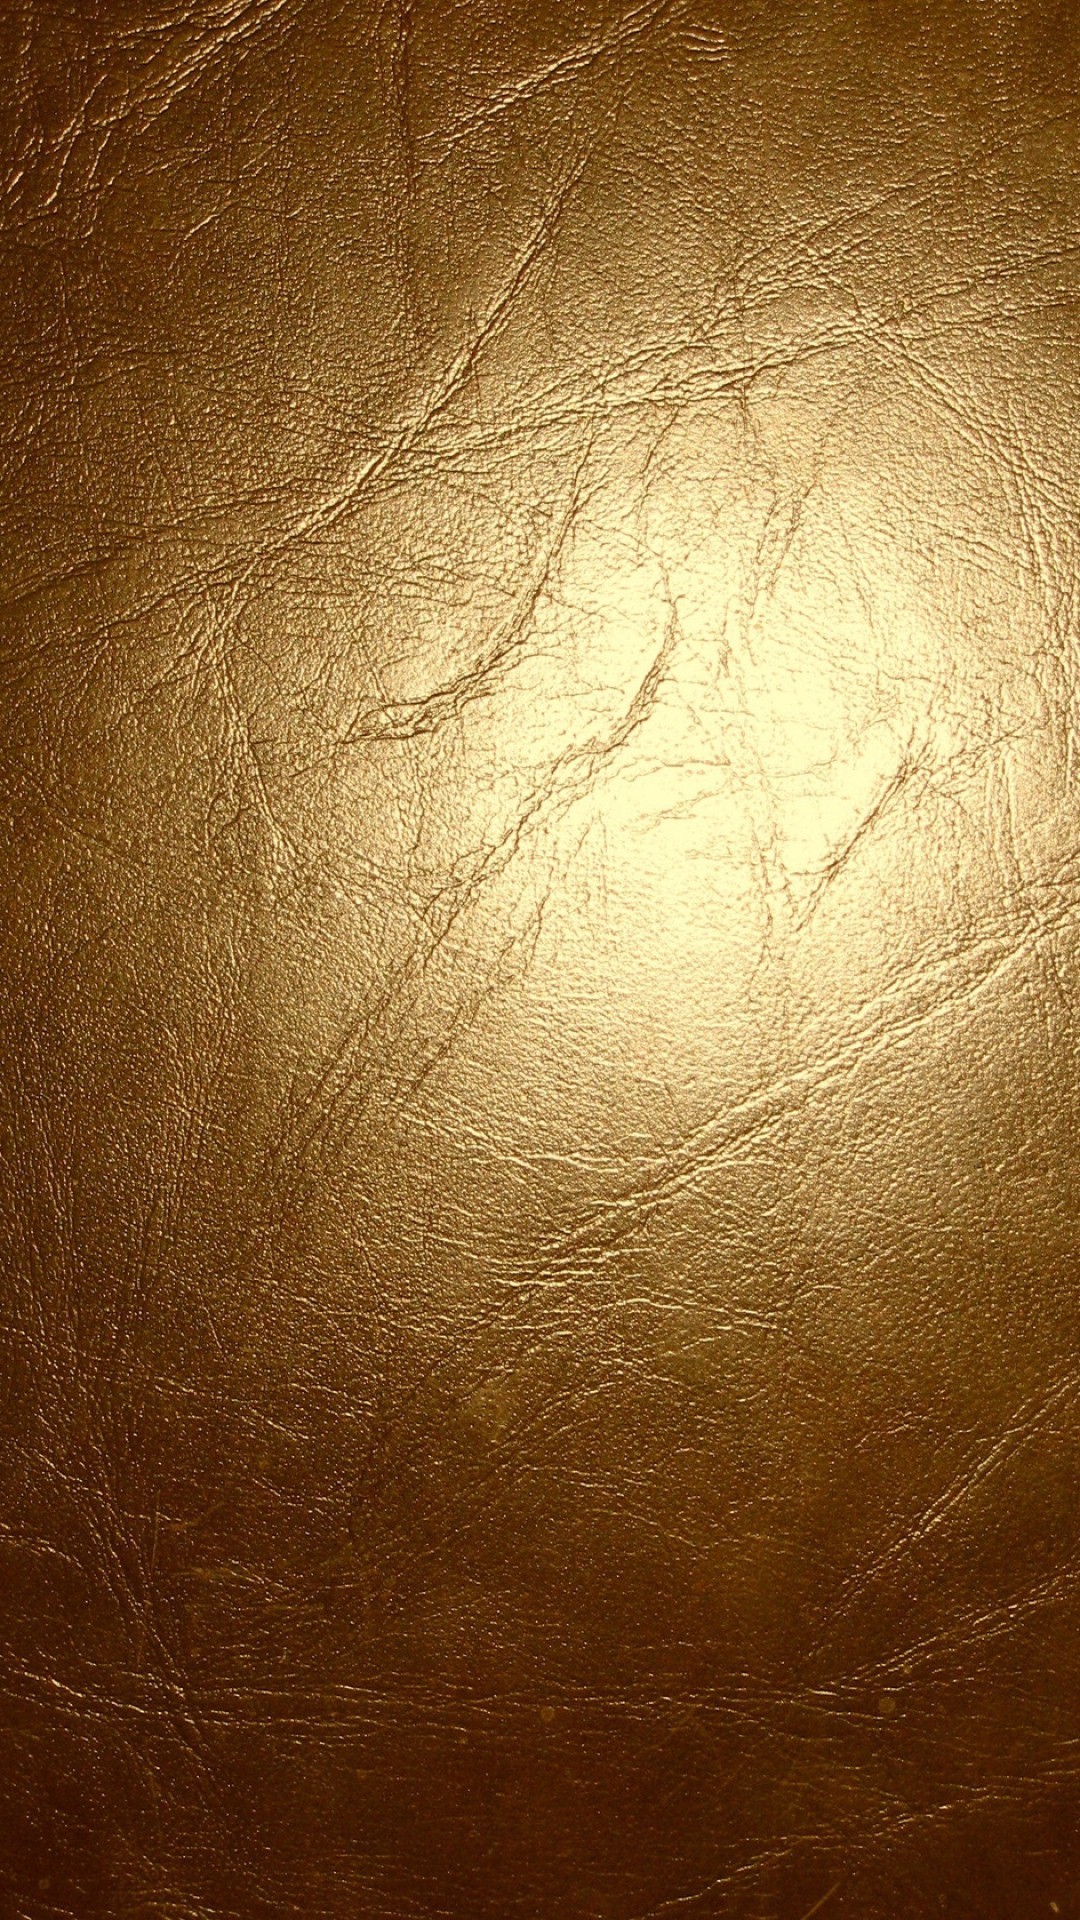 Metallic Gold Wallpaper For Android with HD resolution 1080x1920